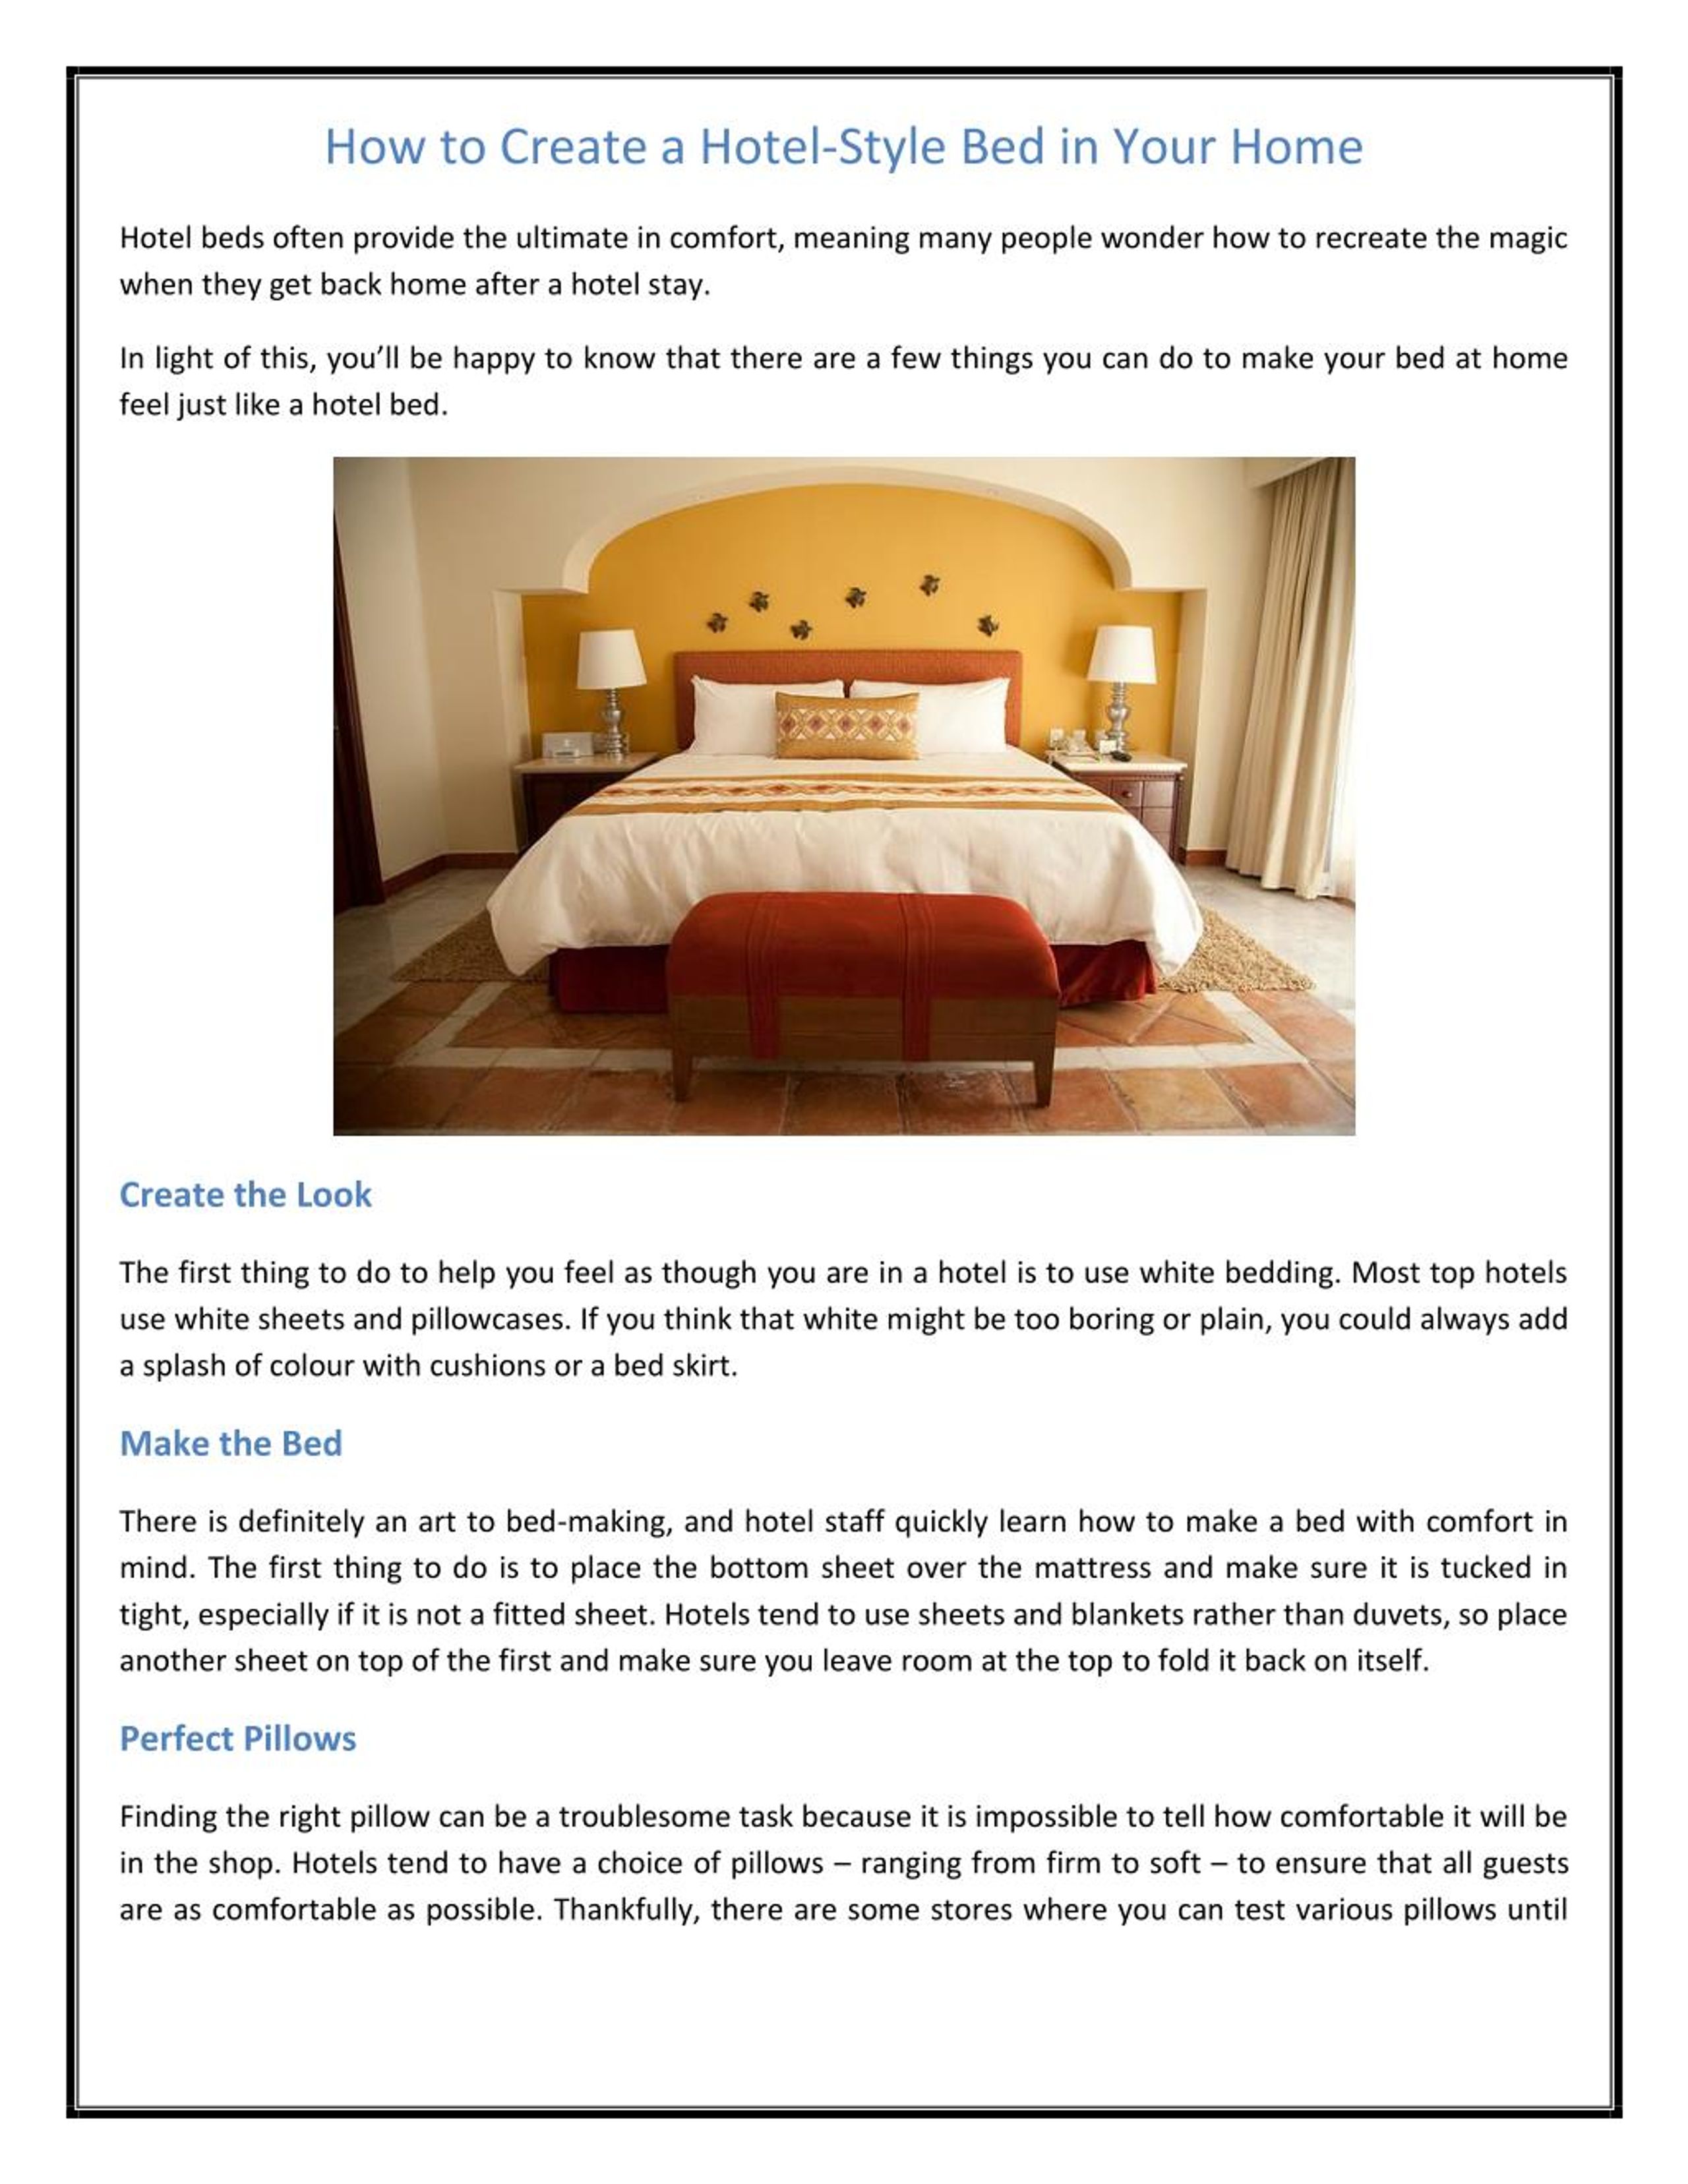 Ppt How To Create A Hotel Style Bed In Your Home Powerpoint Presentation Id 7412437,What Goes With Purple And Green